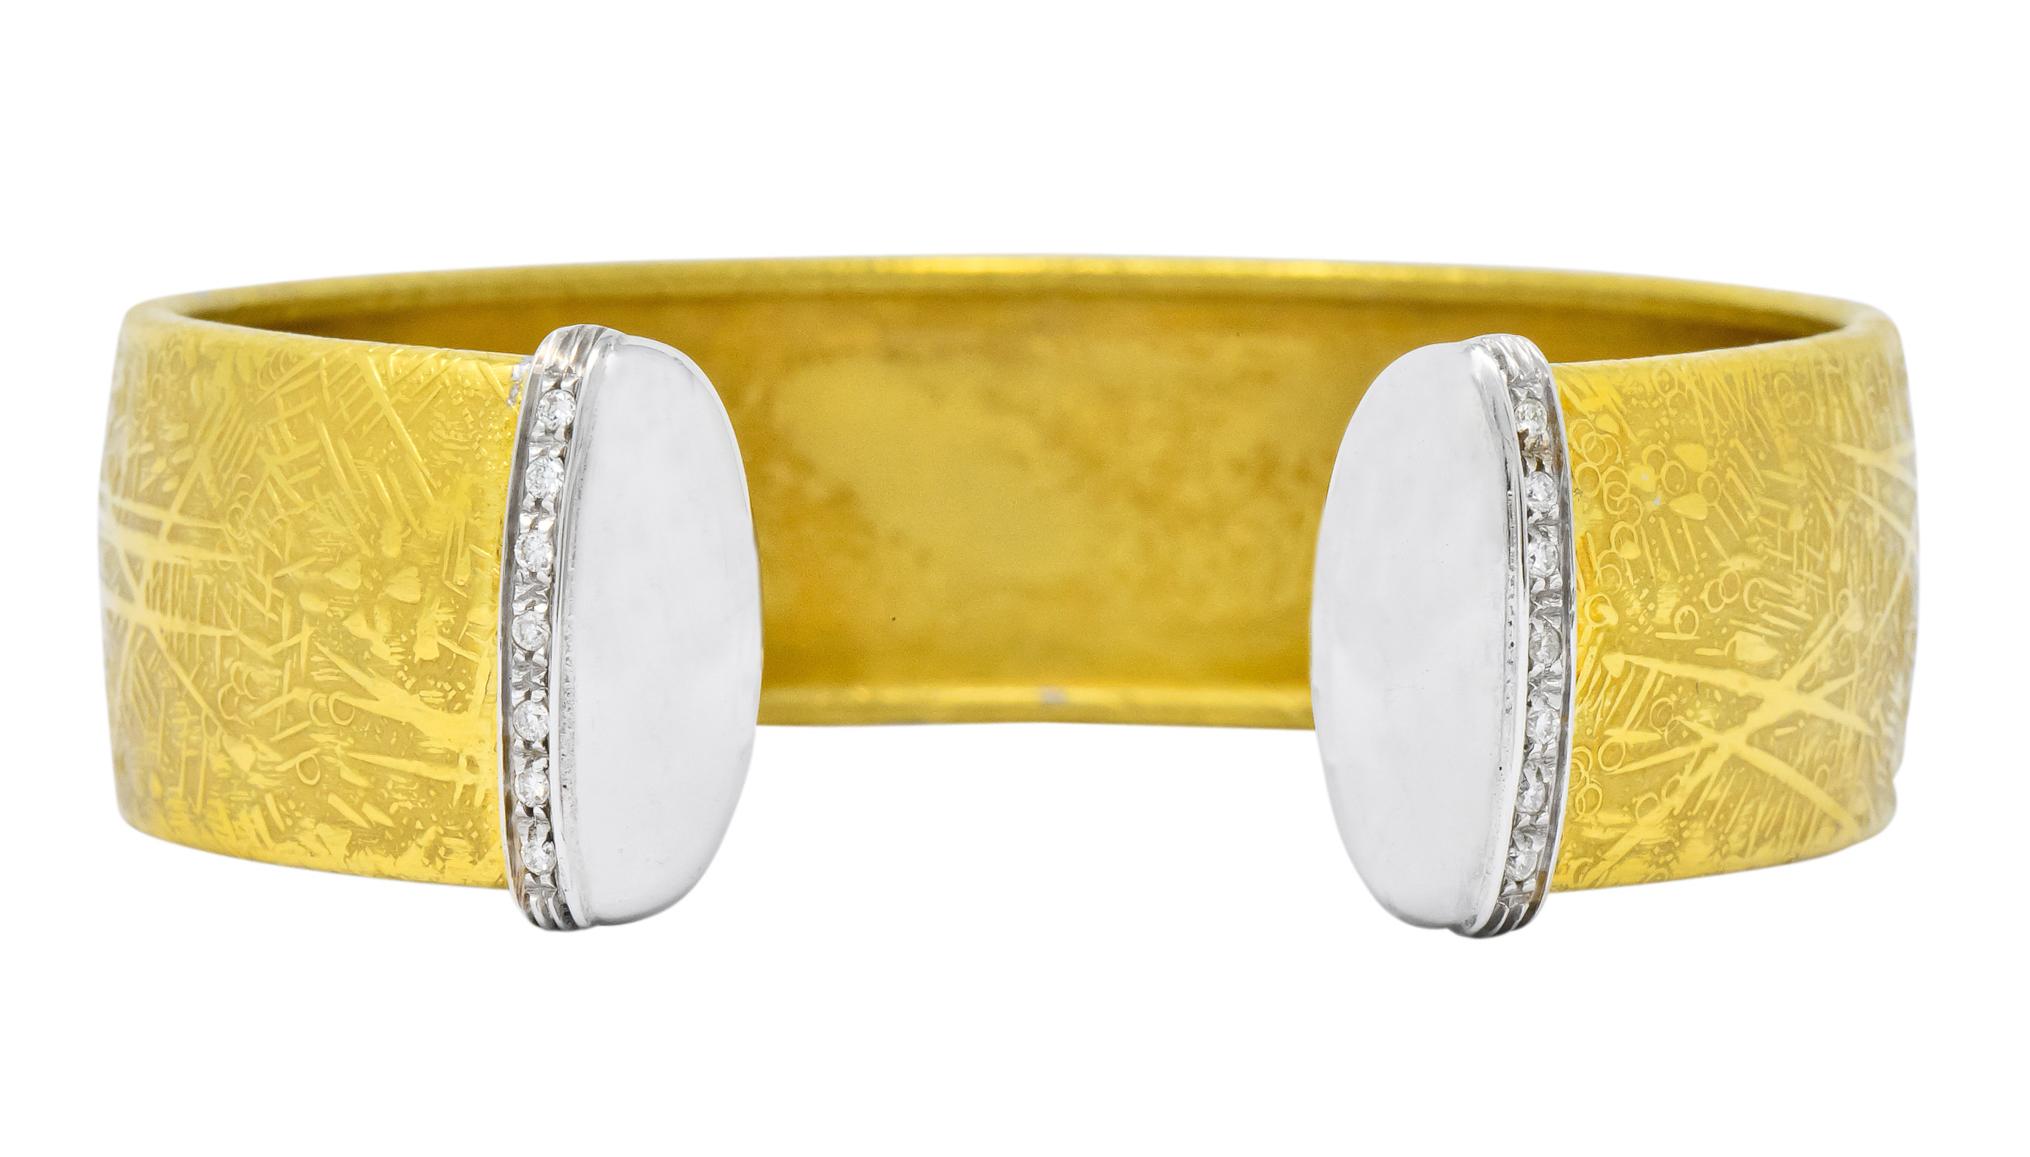 Open cuff with highly detailed and textured gold and completed with high polished white gold terminals

Accented with round brilliant cut diamonds, weighing approximately 0.25 carat total, GHI color and VS to SI clarity

Fully signed Unoaerre and